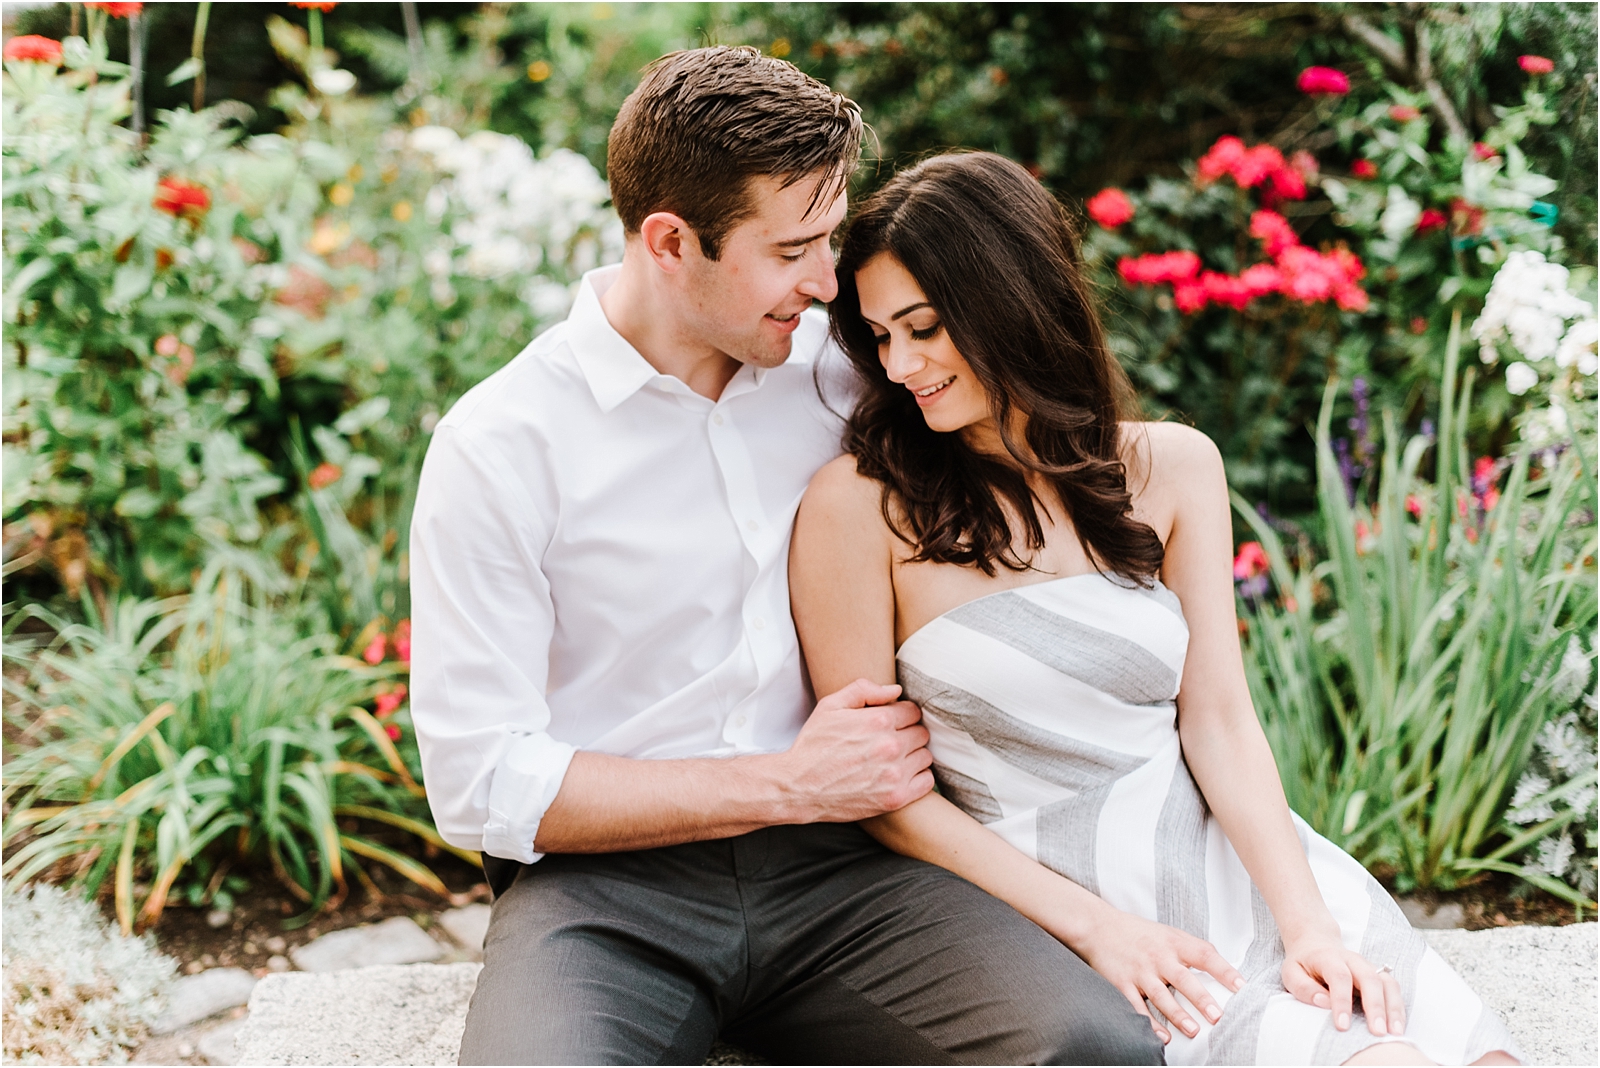 Romantic Summer Engagement Session at Halibut Point State Park in Rockport, MA by Boston Wedding Photographer Annmarie Swift